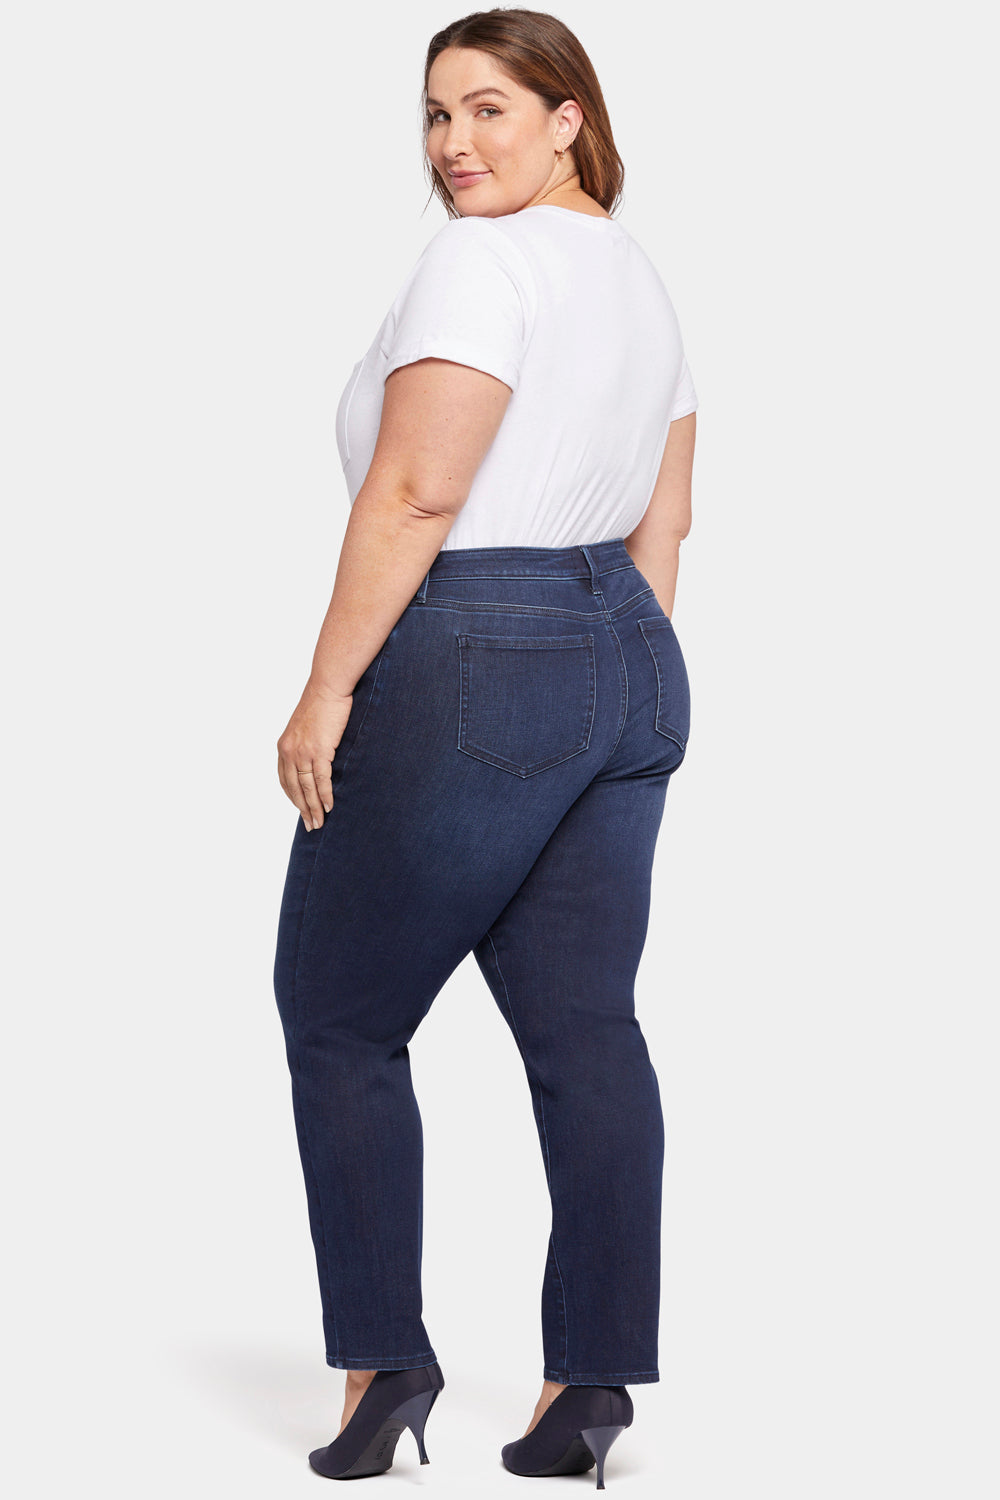 NYDJ Relaxed Slender Jeans In Plus Size  - Underground